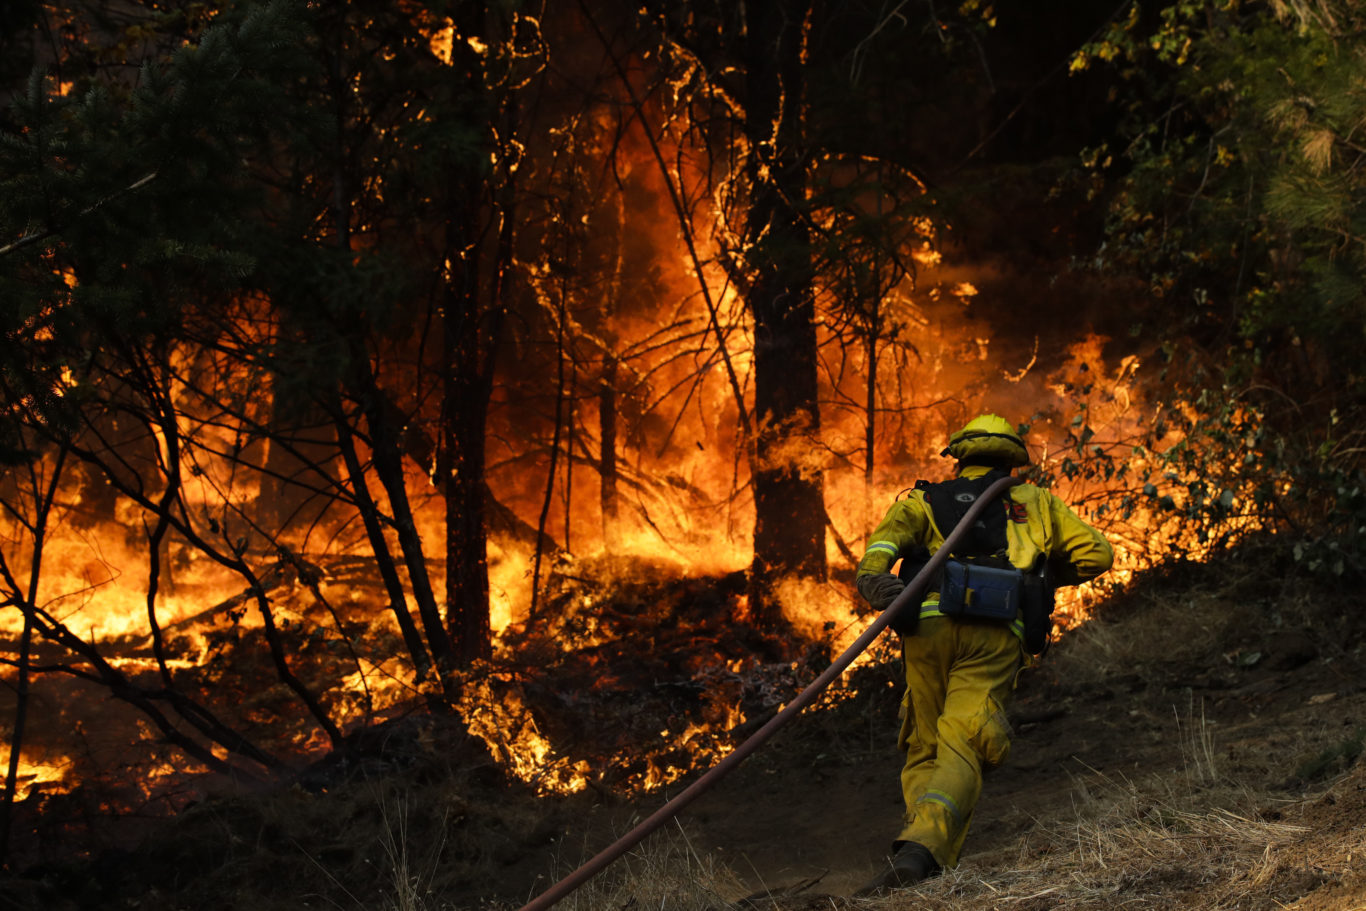 A firefighter tackles a blaze burning along the Highway 29 near Calistoga, California, in October 2017 (Jae C Hong/PA)